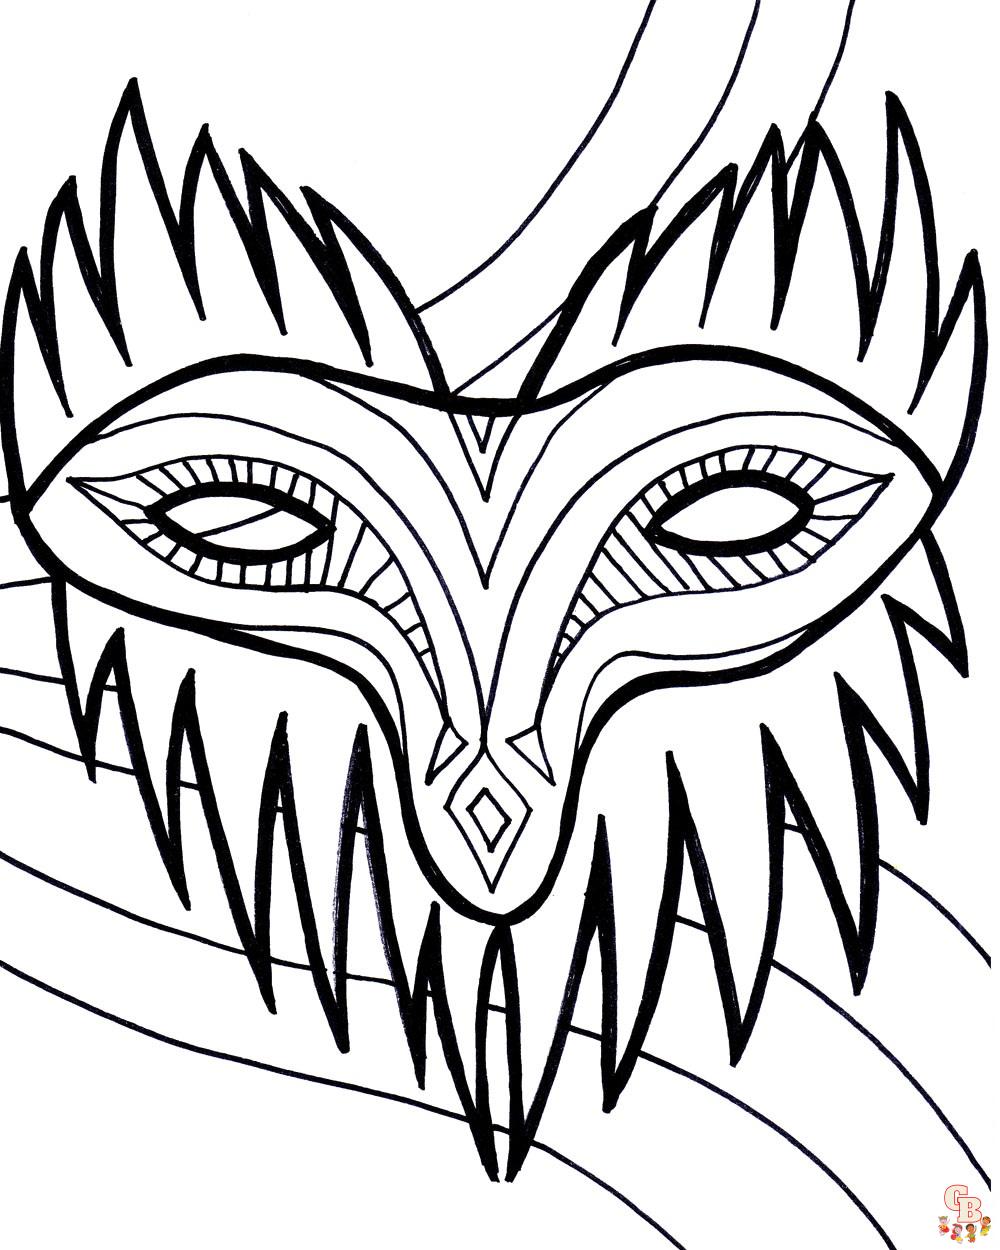 Mardi Gras coloring pages 9